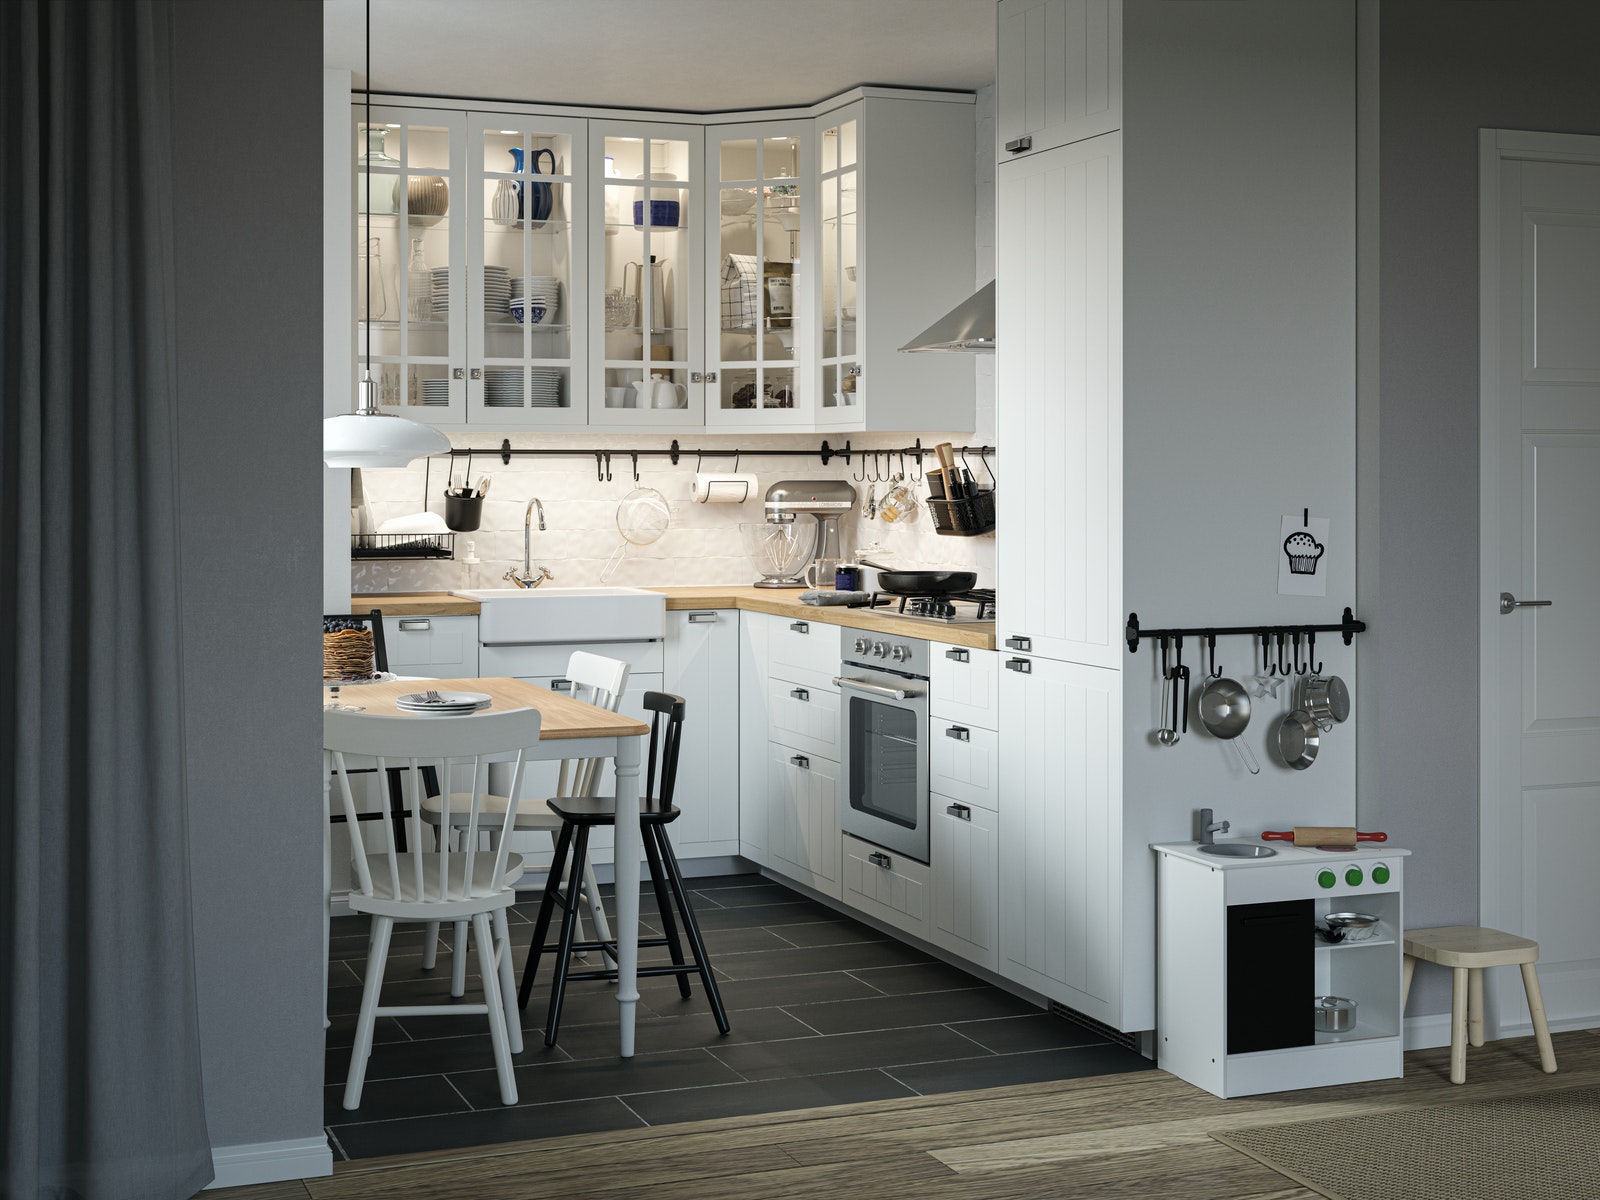 IKEA - Bake, play and spend time together in this cosy kitchen